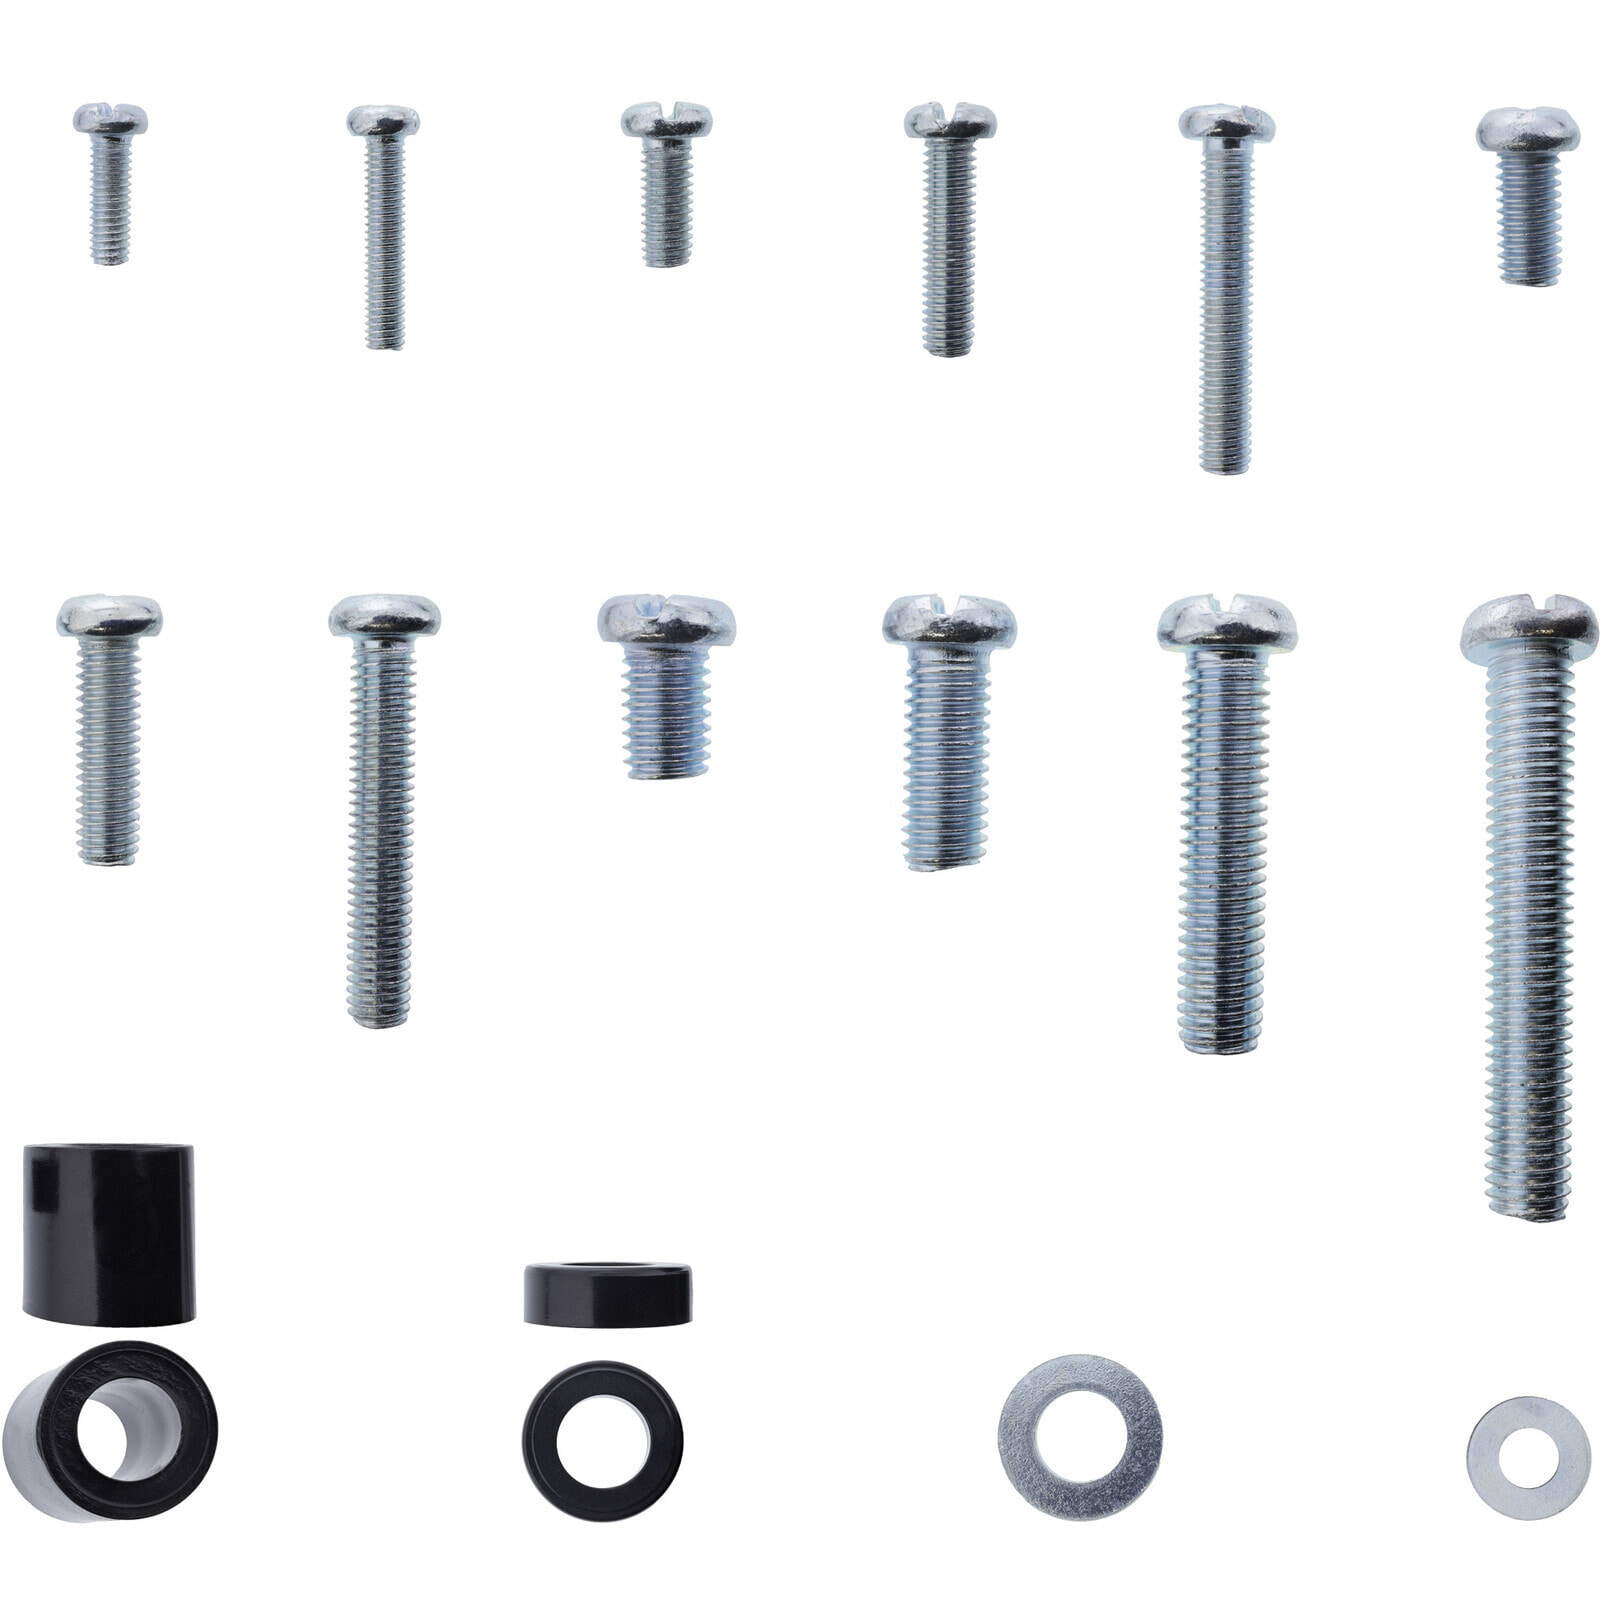 Screw set 68 pieces for TV wall mount - Wall - Zinc - 68 pc(s)